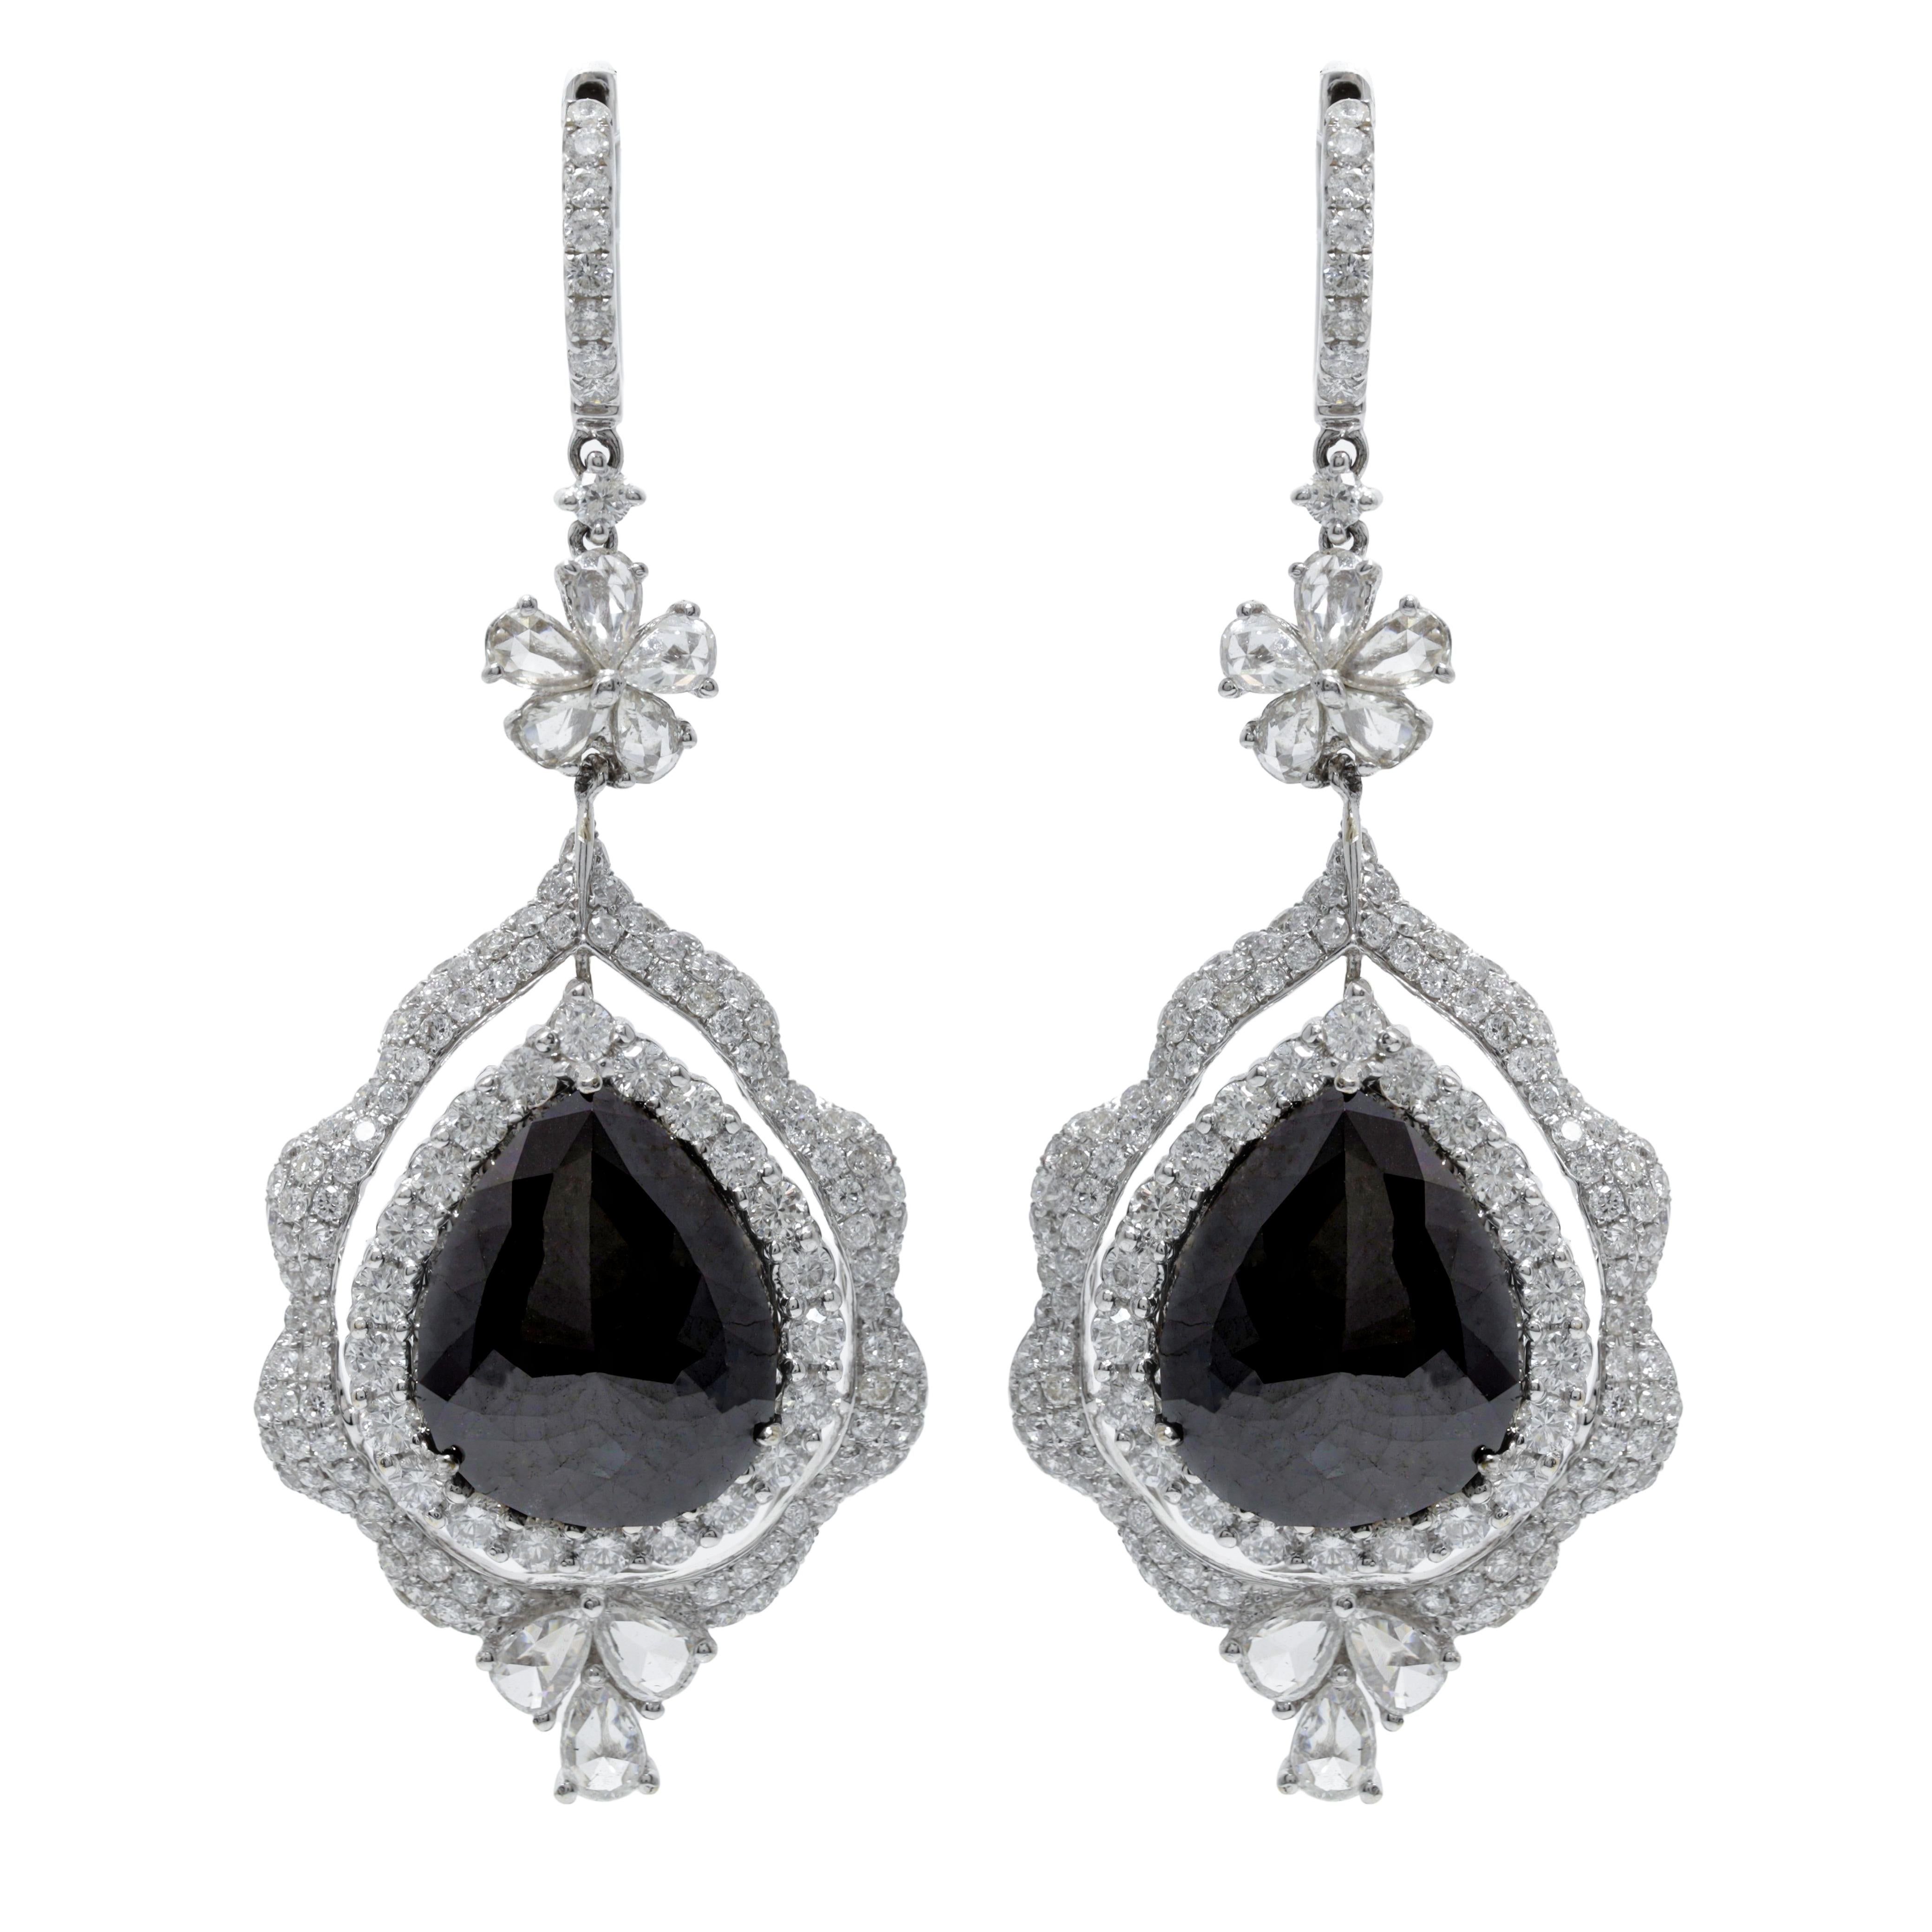 Le2885-118k white gold & black diamond earrings
Features 14.50 carats of pear shape black diamond with 5.00 carats of diamonds.
Diamond encrusted accents in dl.Drop design hinged back closure
Length of dl.Drop: 2.2